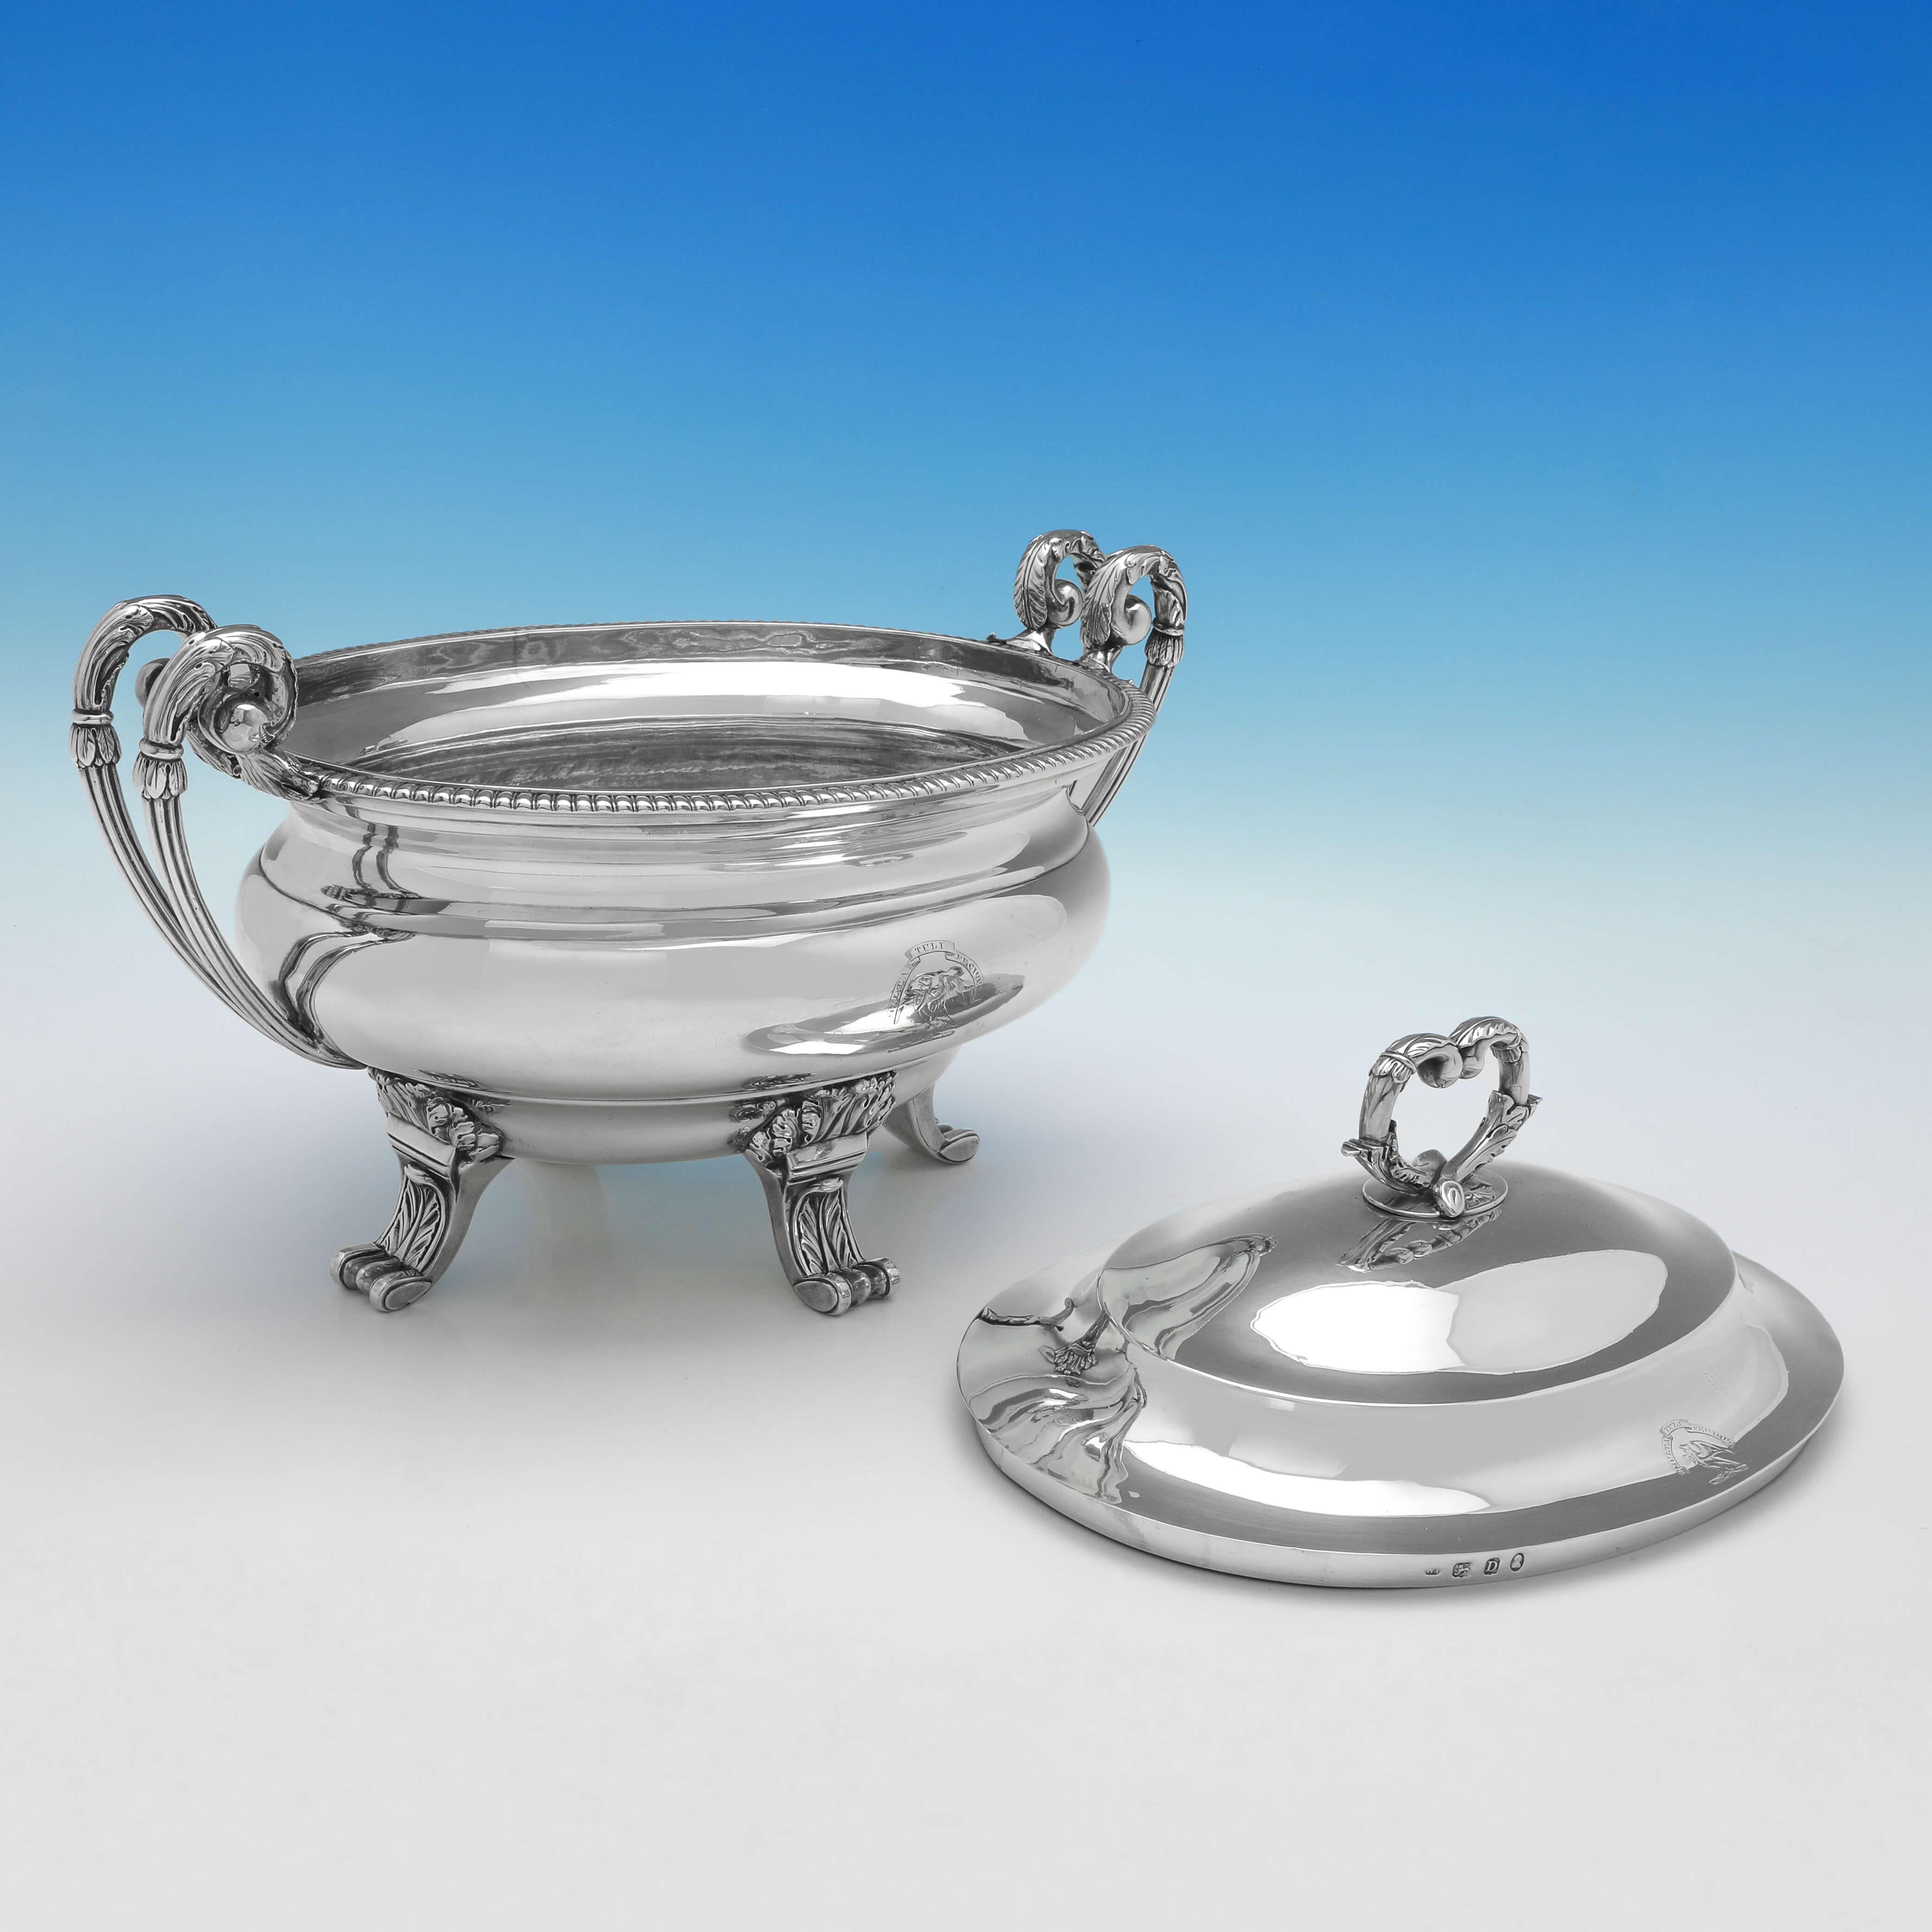 English Neoclassical George III Antique Sterling Silver Soup Tureen, William Pitts, 1799 For Sale